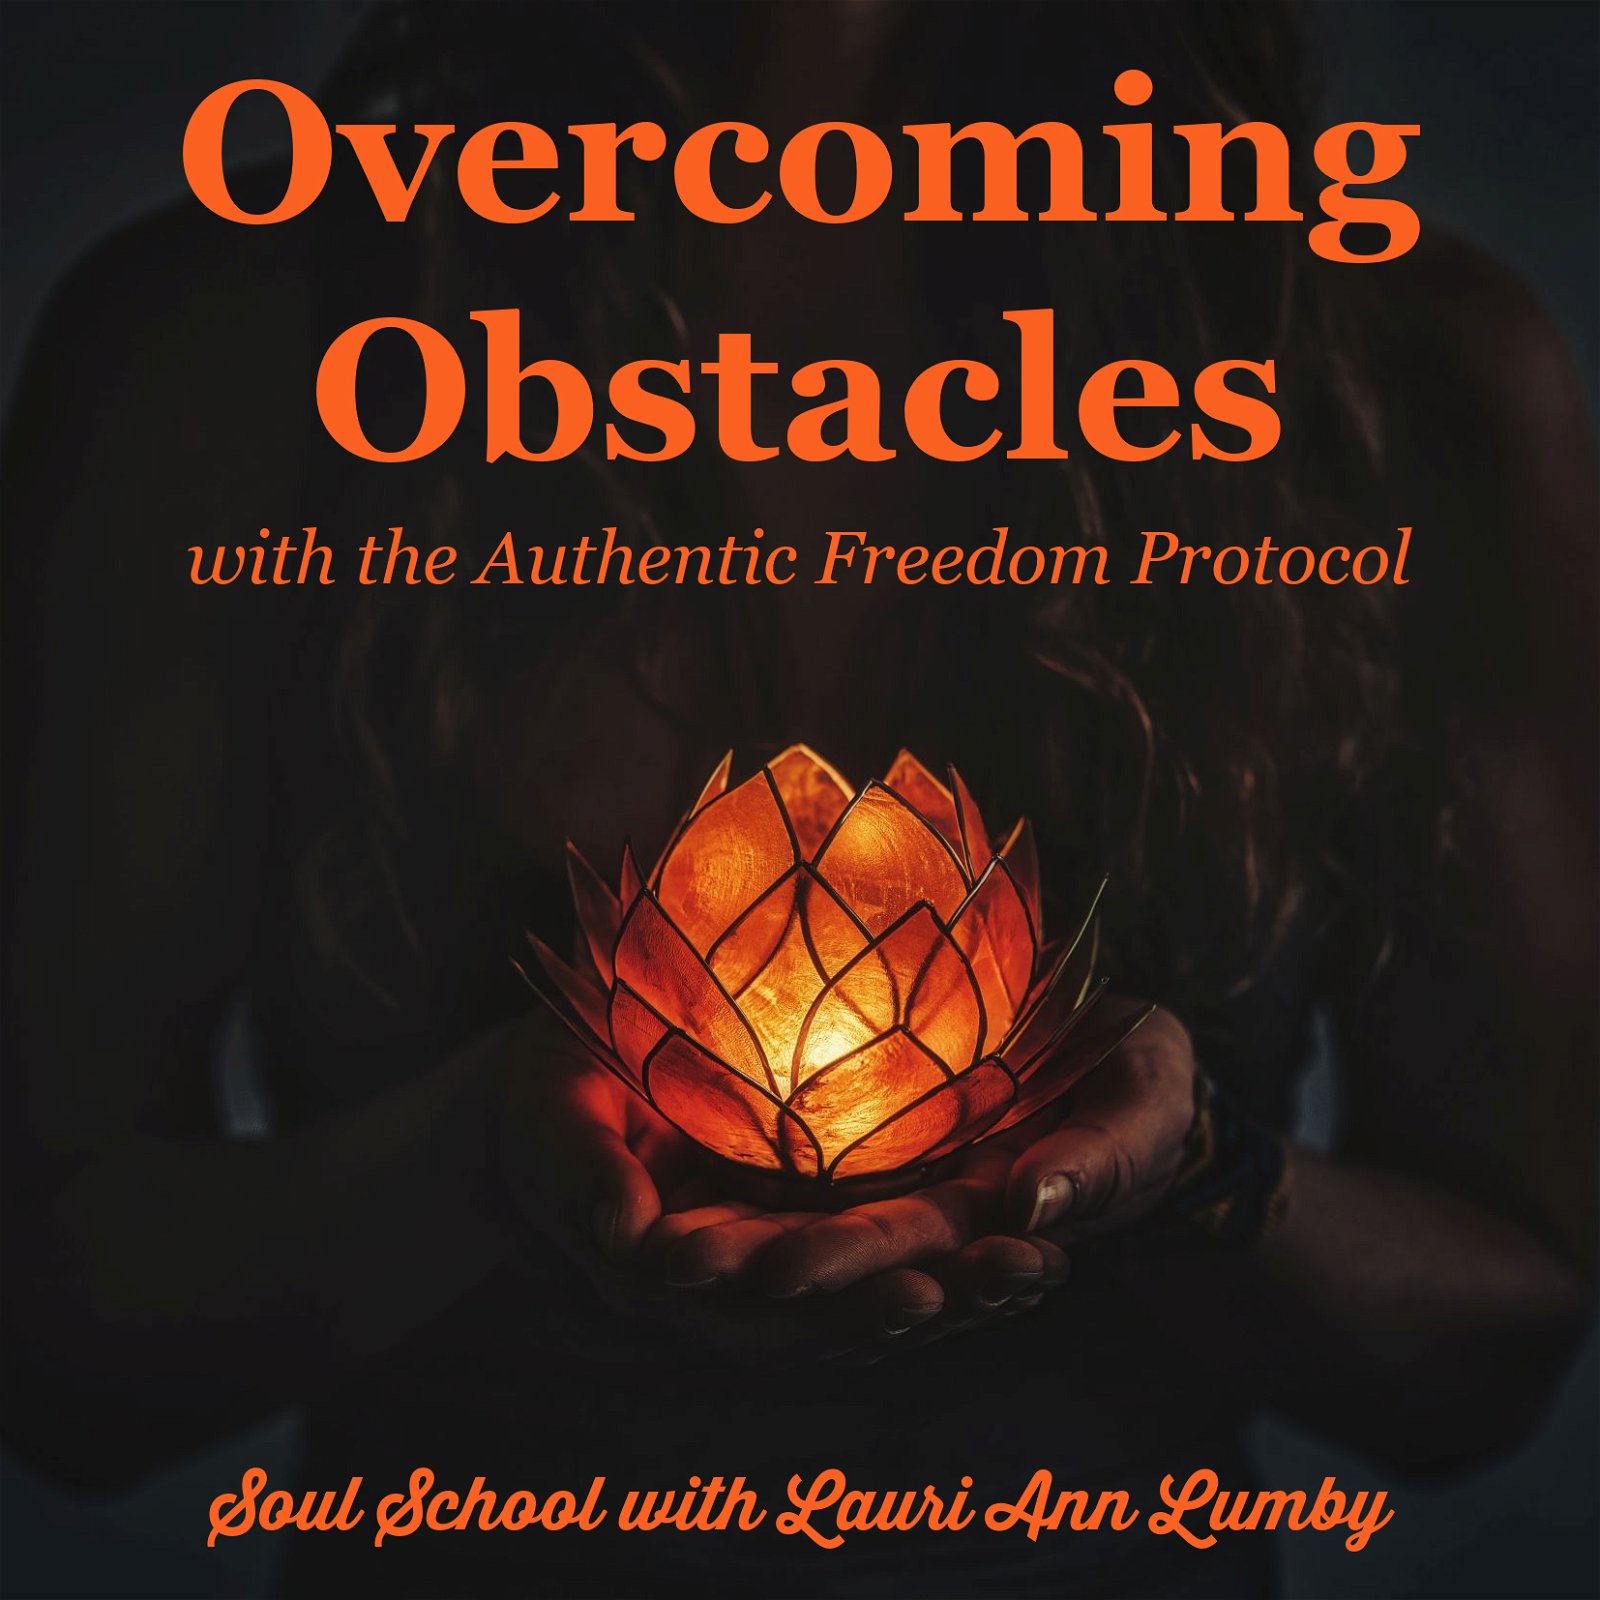 Overcoming Obstacles with the Authentic Freedom Protocol